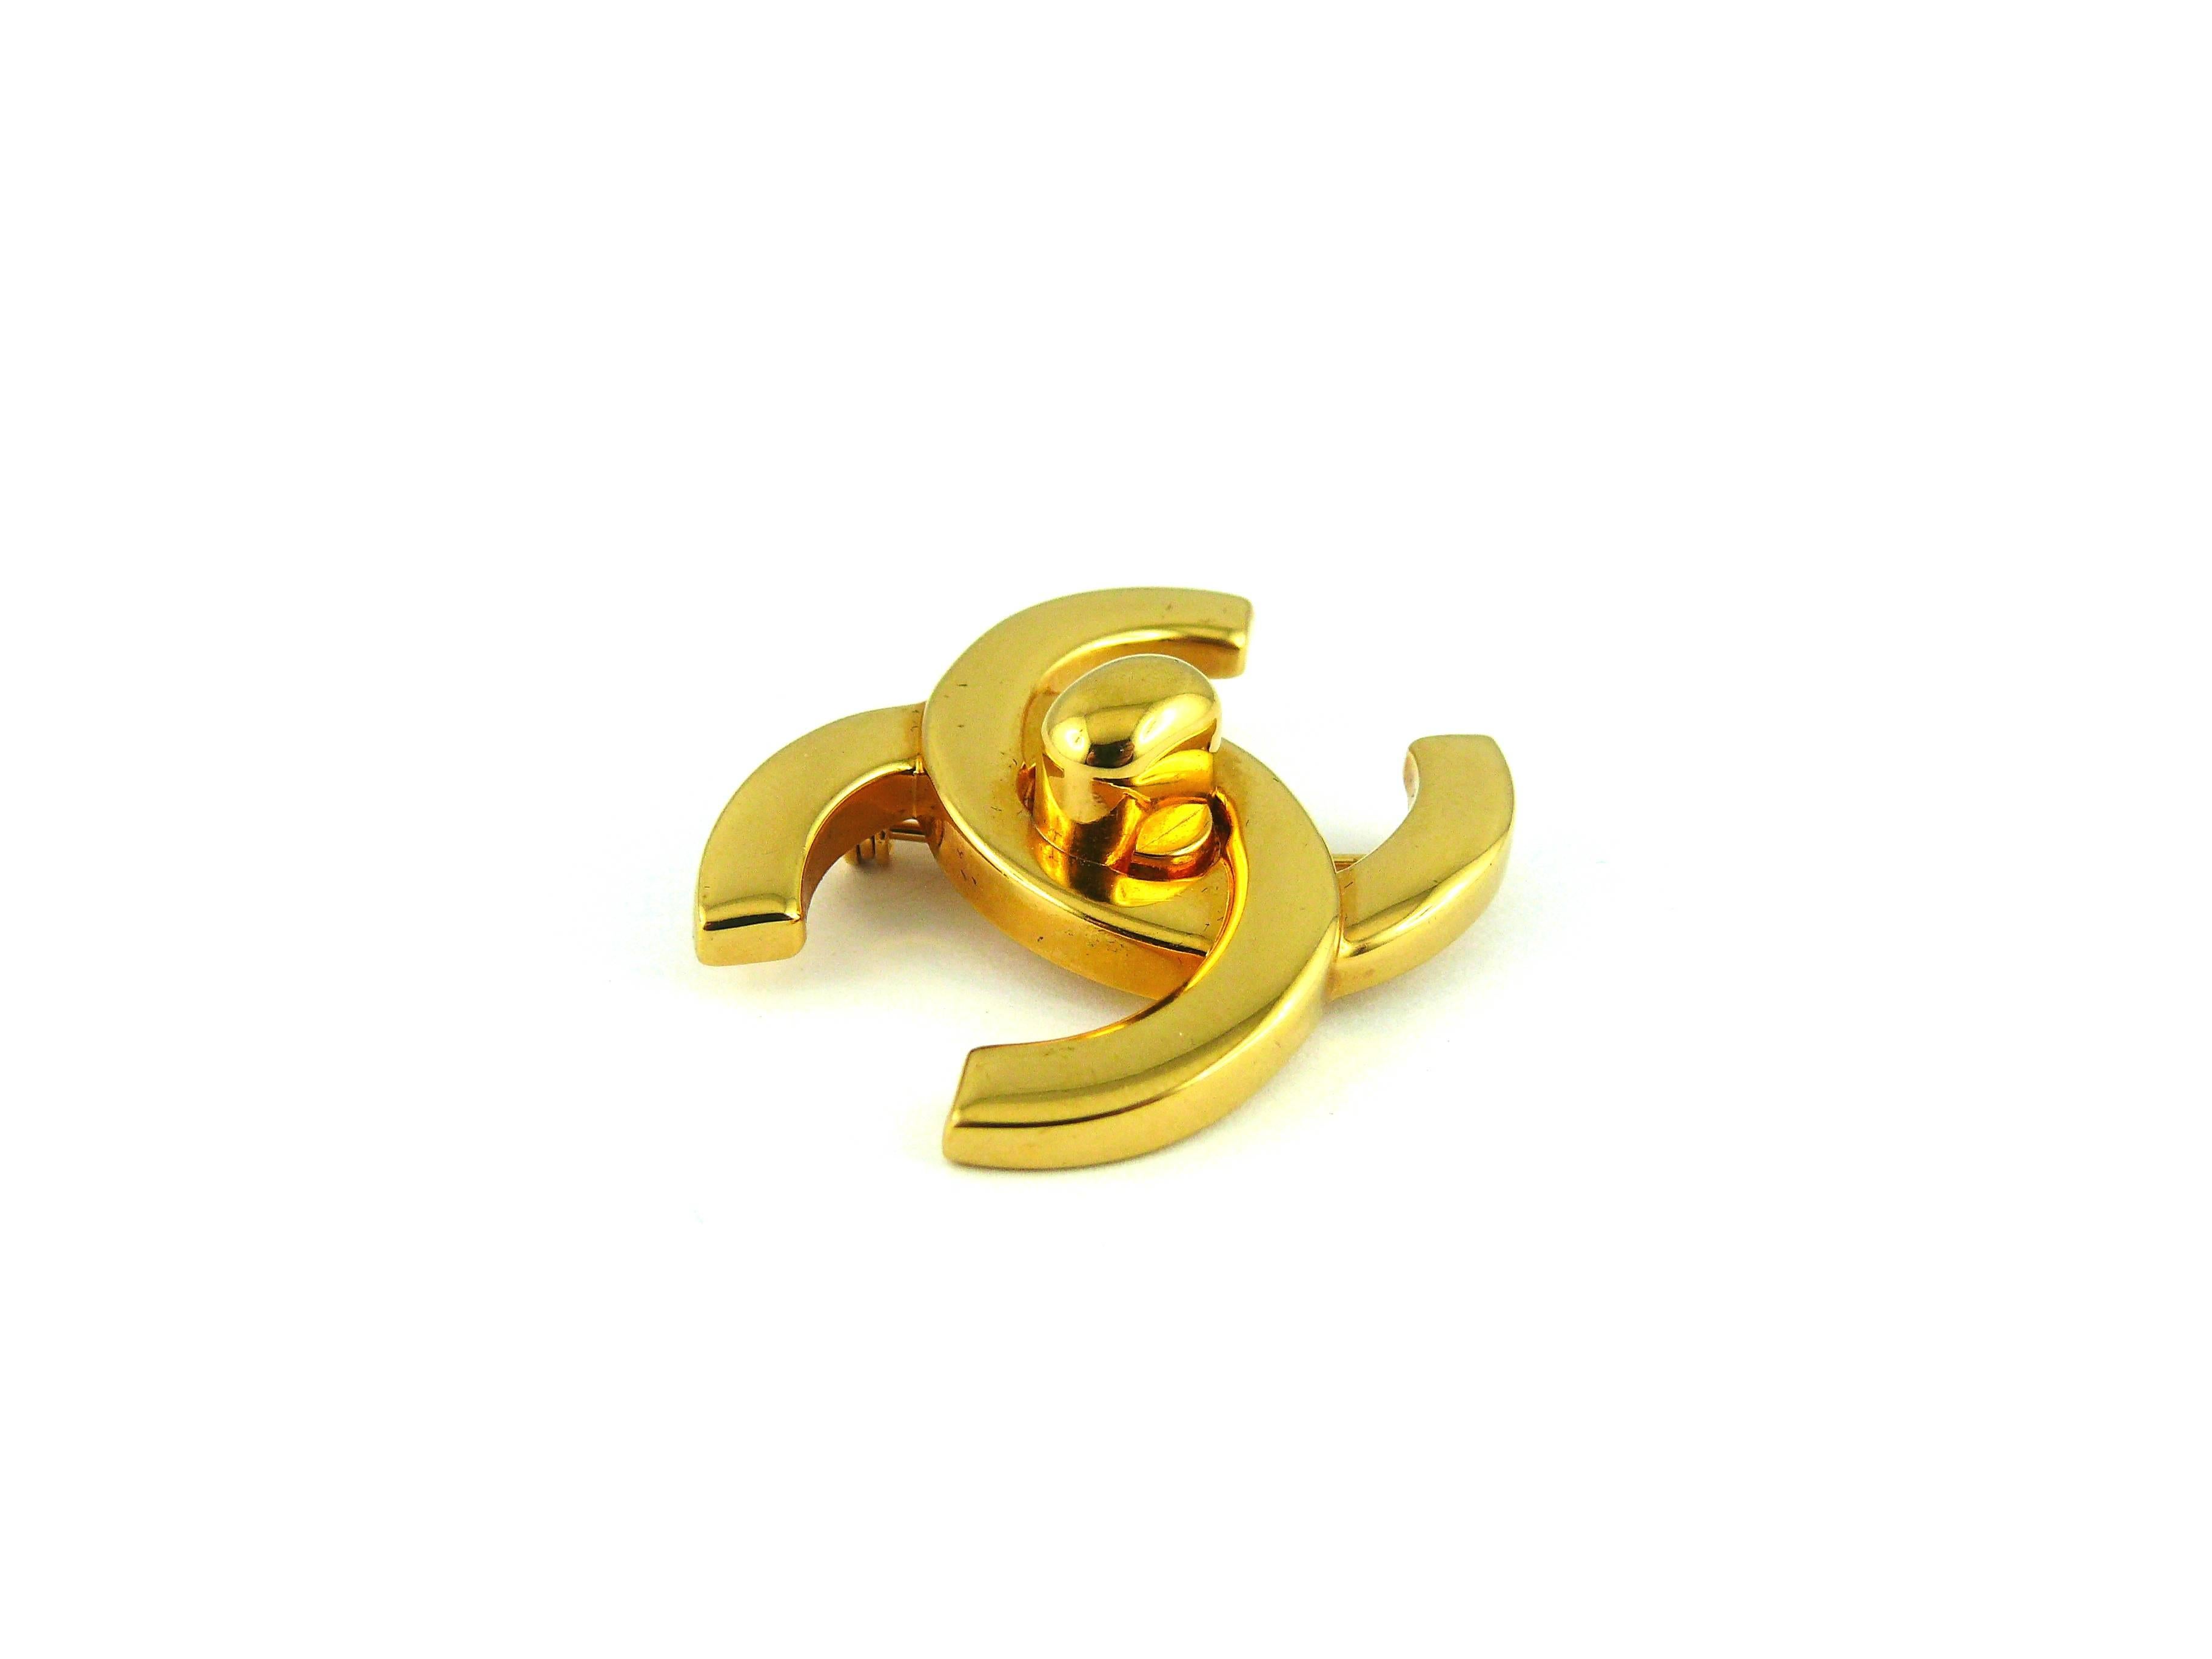 CHANEL most wanted vintage gold tone CC turn lock brooch.

Fall 1996 Collection.

Marked CHANEL 96 A Made in France.

JEWELRY CONDITION CHART
- New or never worn : item is in pristine condition with no noticeable imperfections
- Excellent : item has